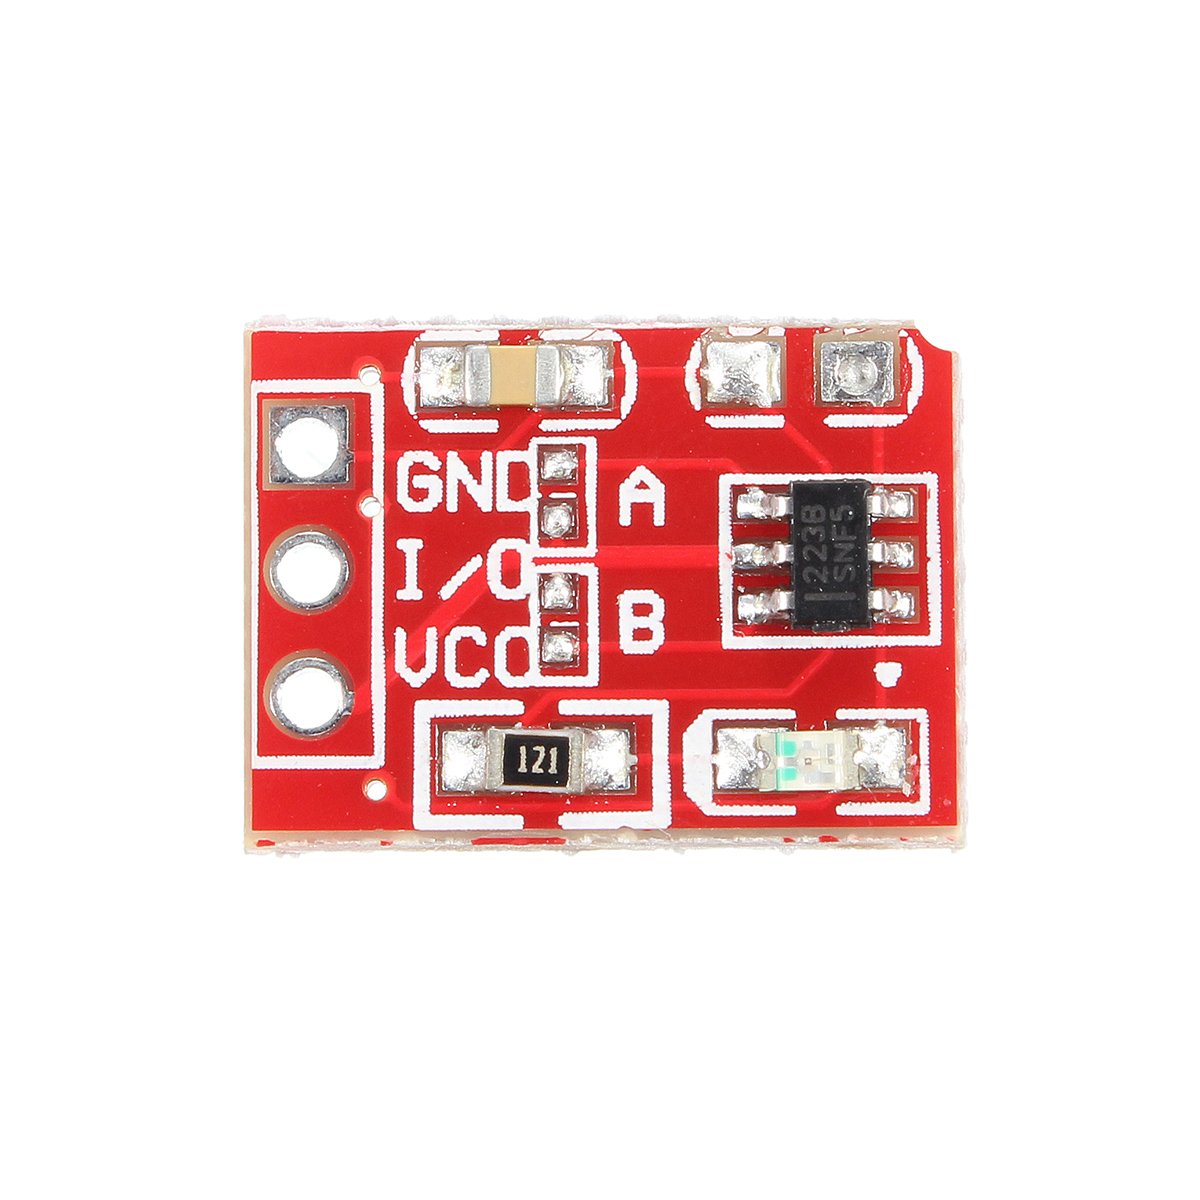 20pcs-25-55V-TTP223-Capacitive-Touch-Switch-Button-Self-Lock-Module-1338052